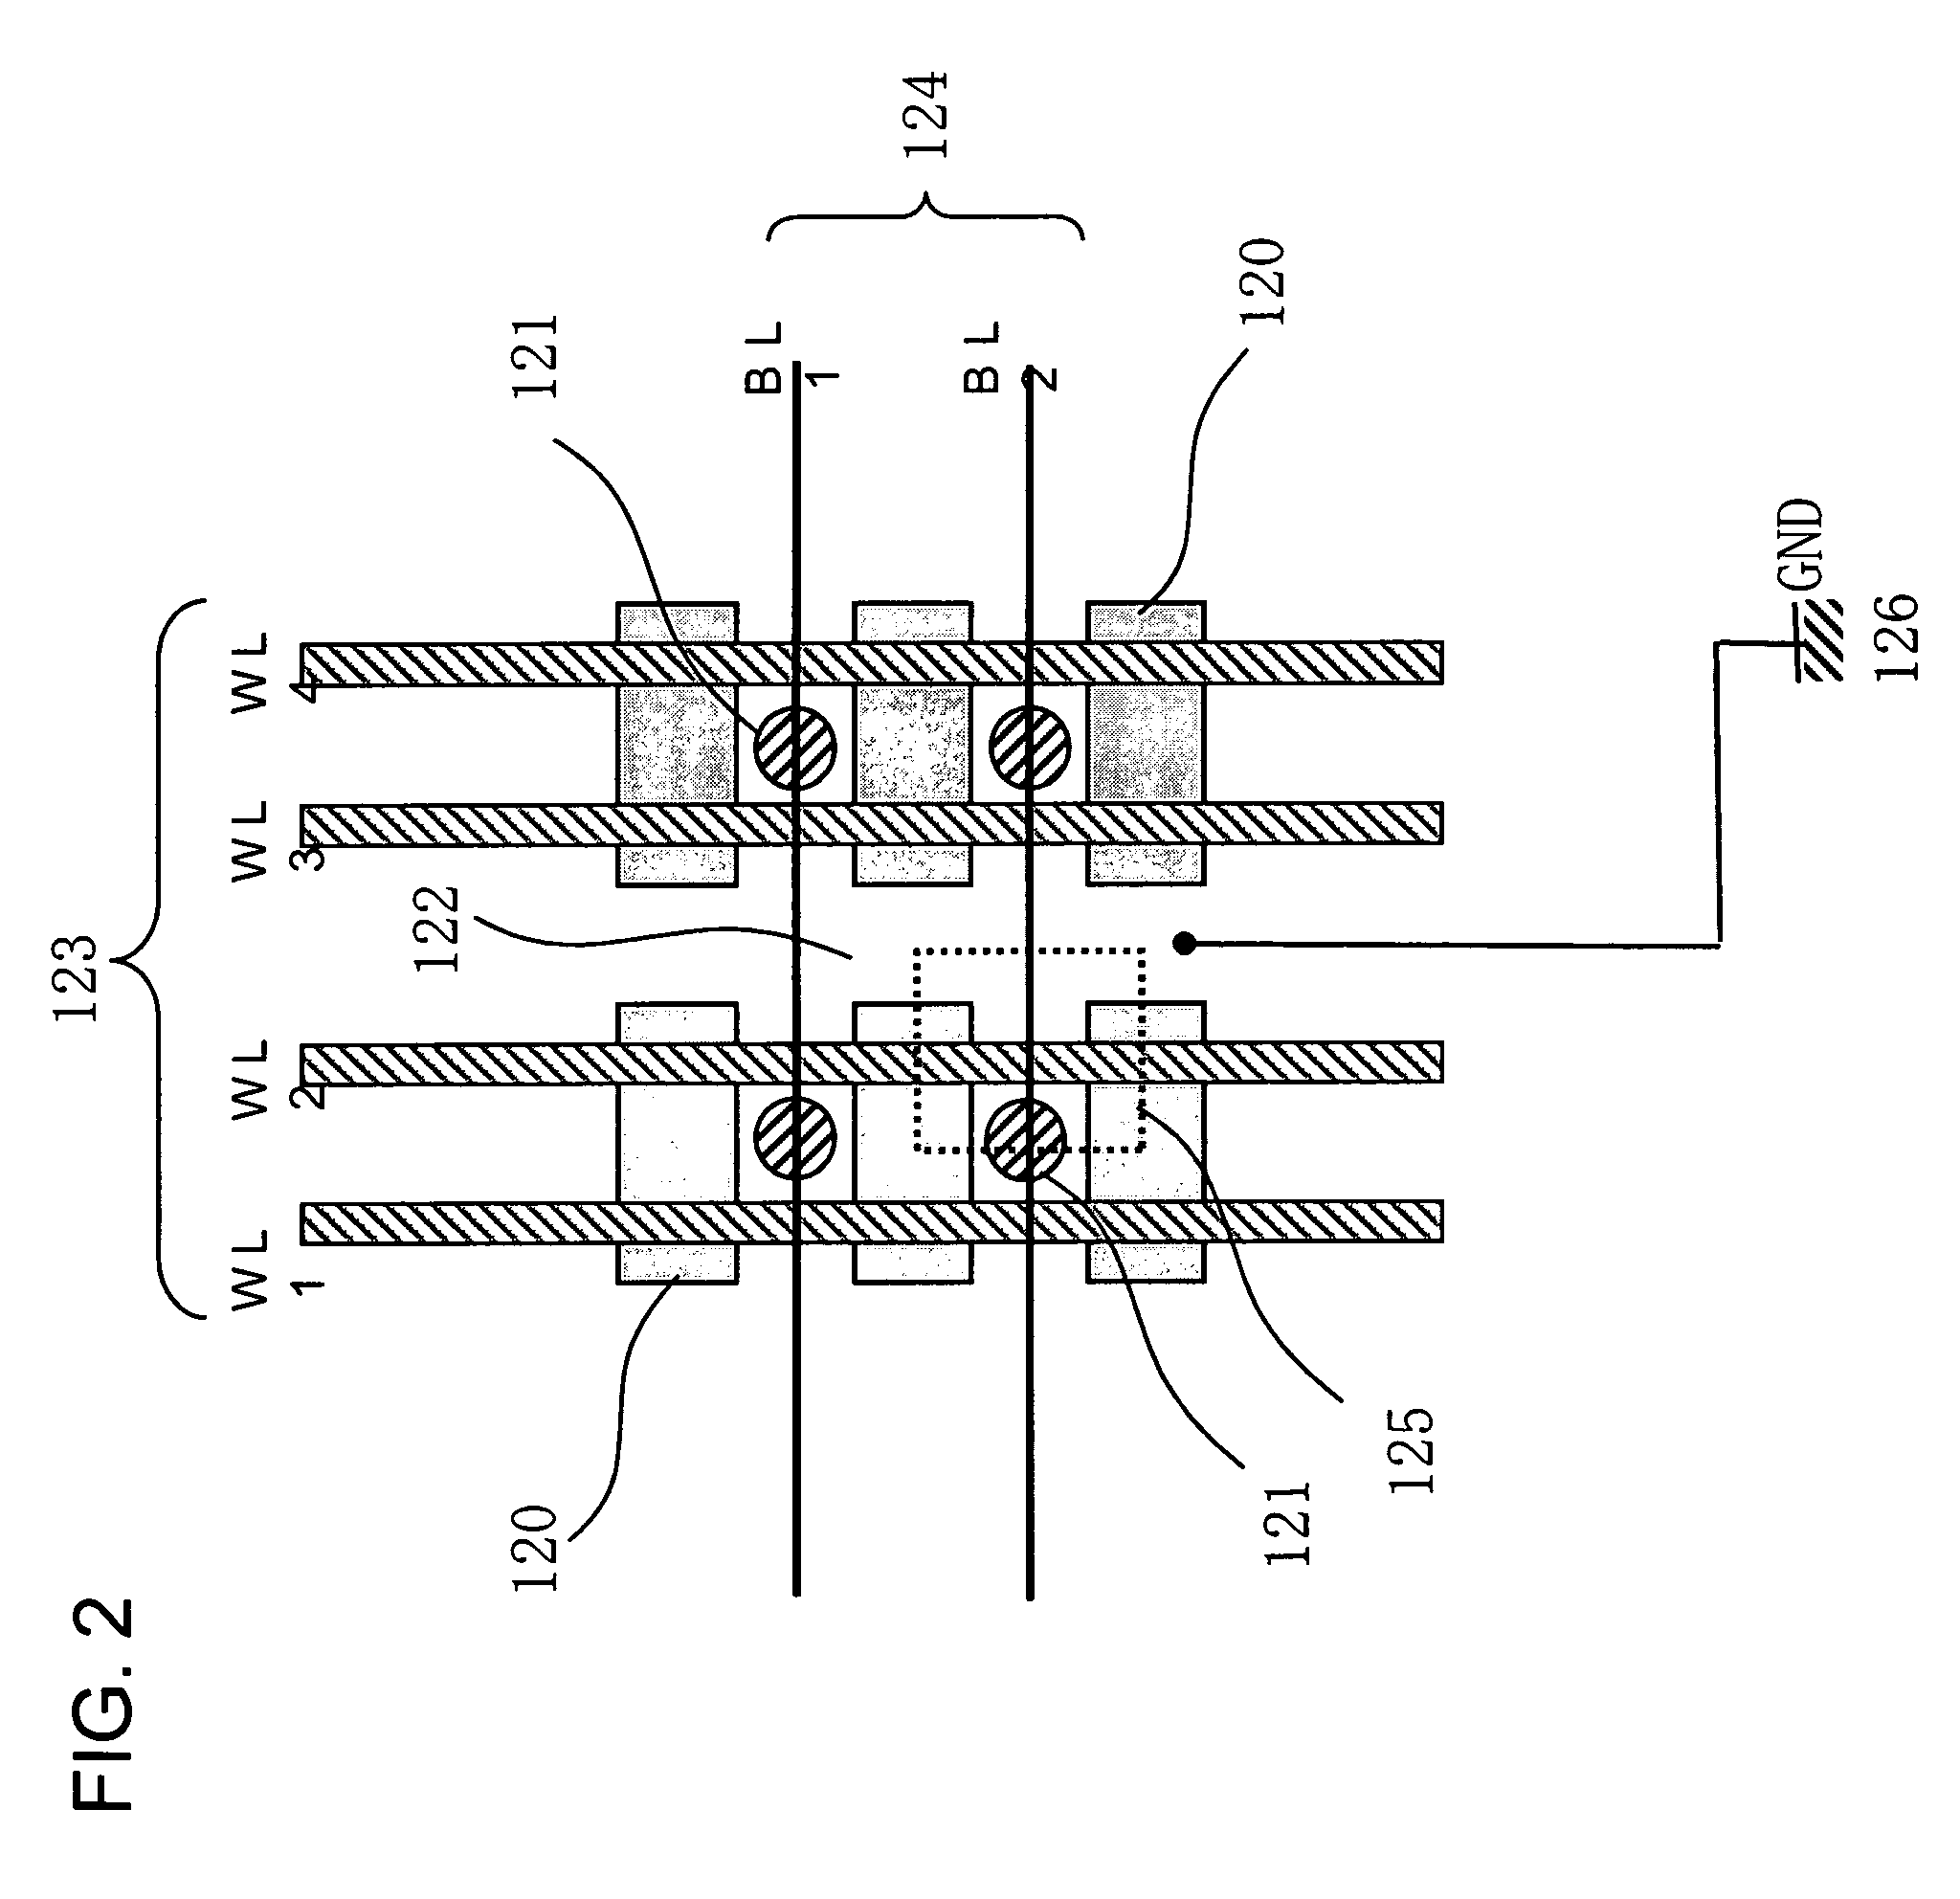 Semiconductor memory device and manufacturing process therefore